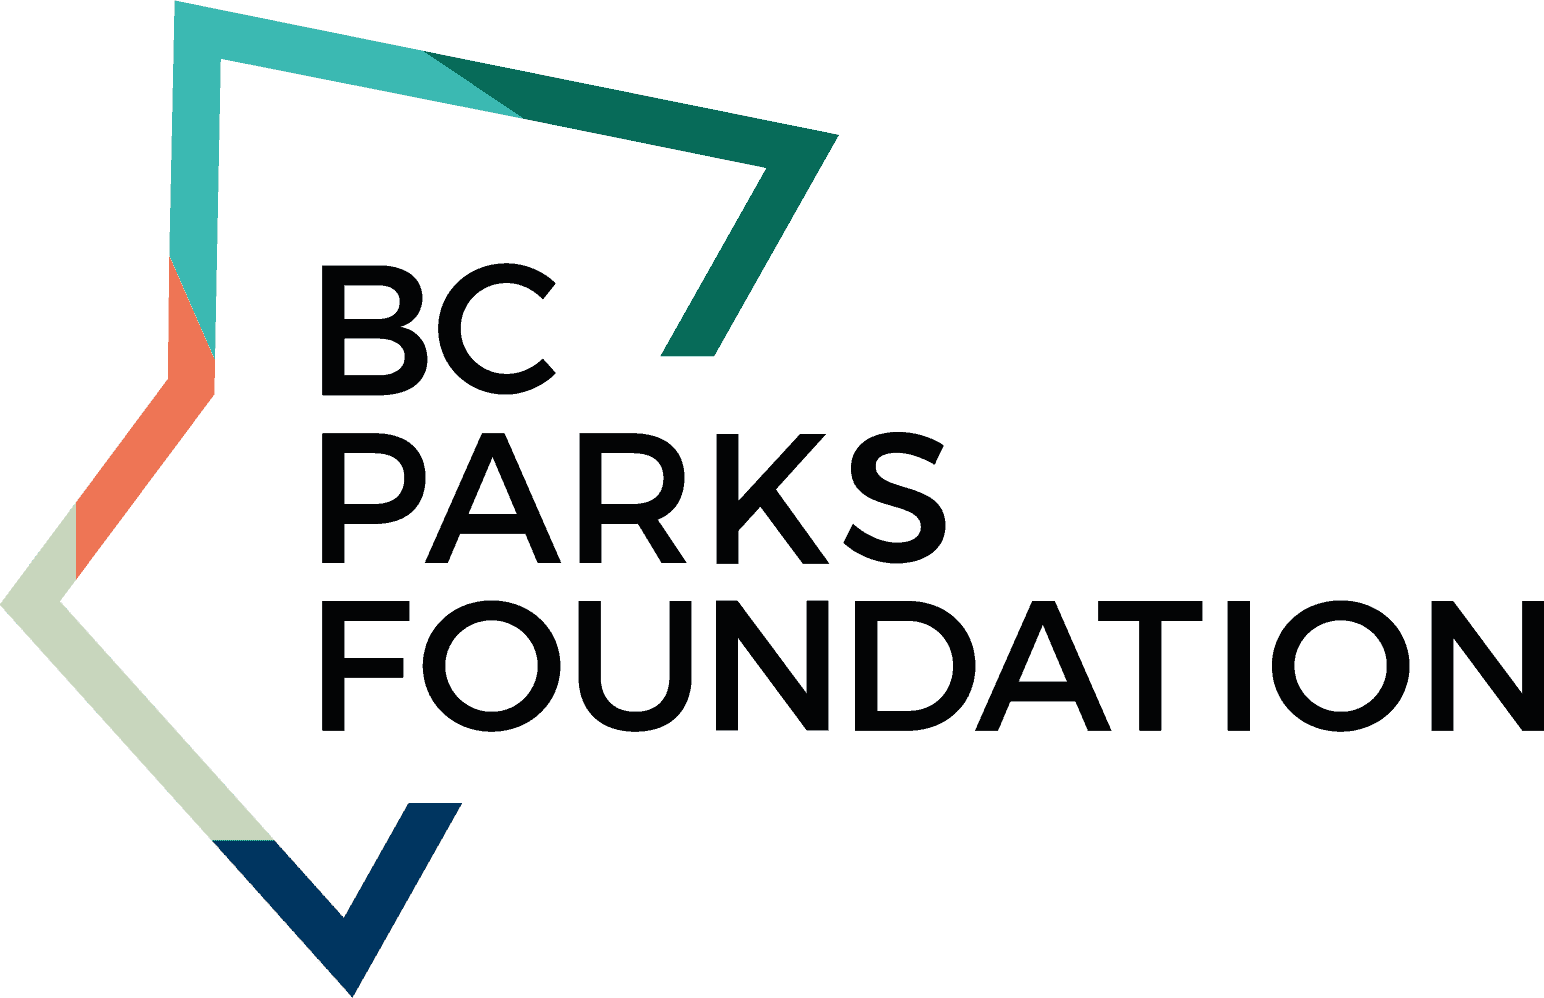 An image depicting the words BC Parks Foundation